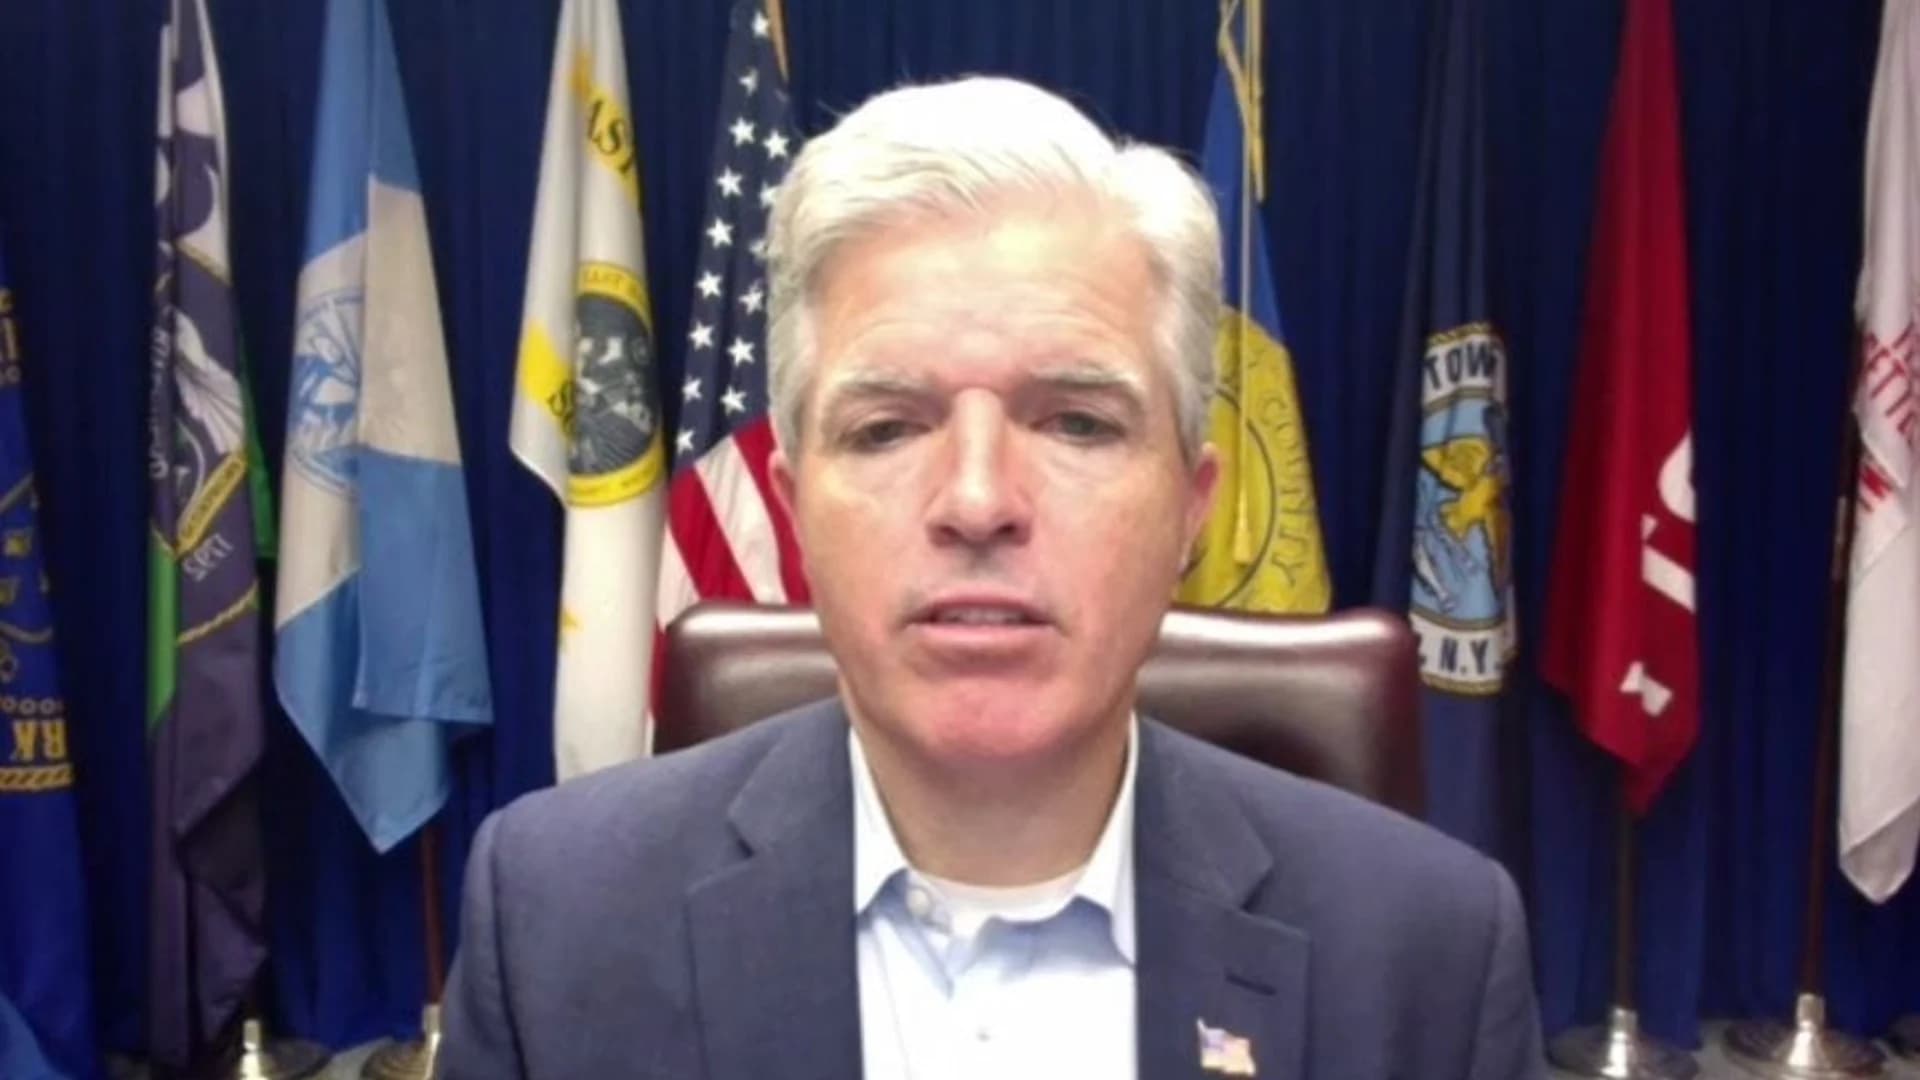 Bellone: Suffolk currently fulfilling 4 of 7 metrics needed to reopen